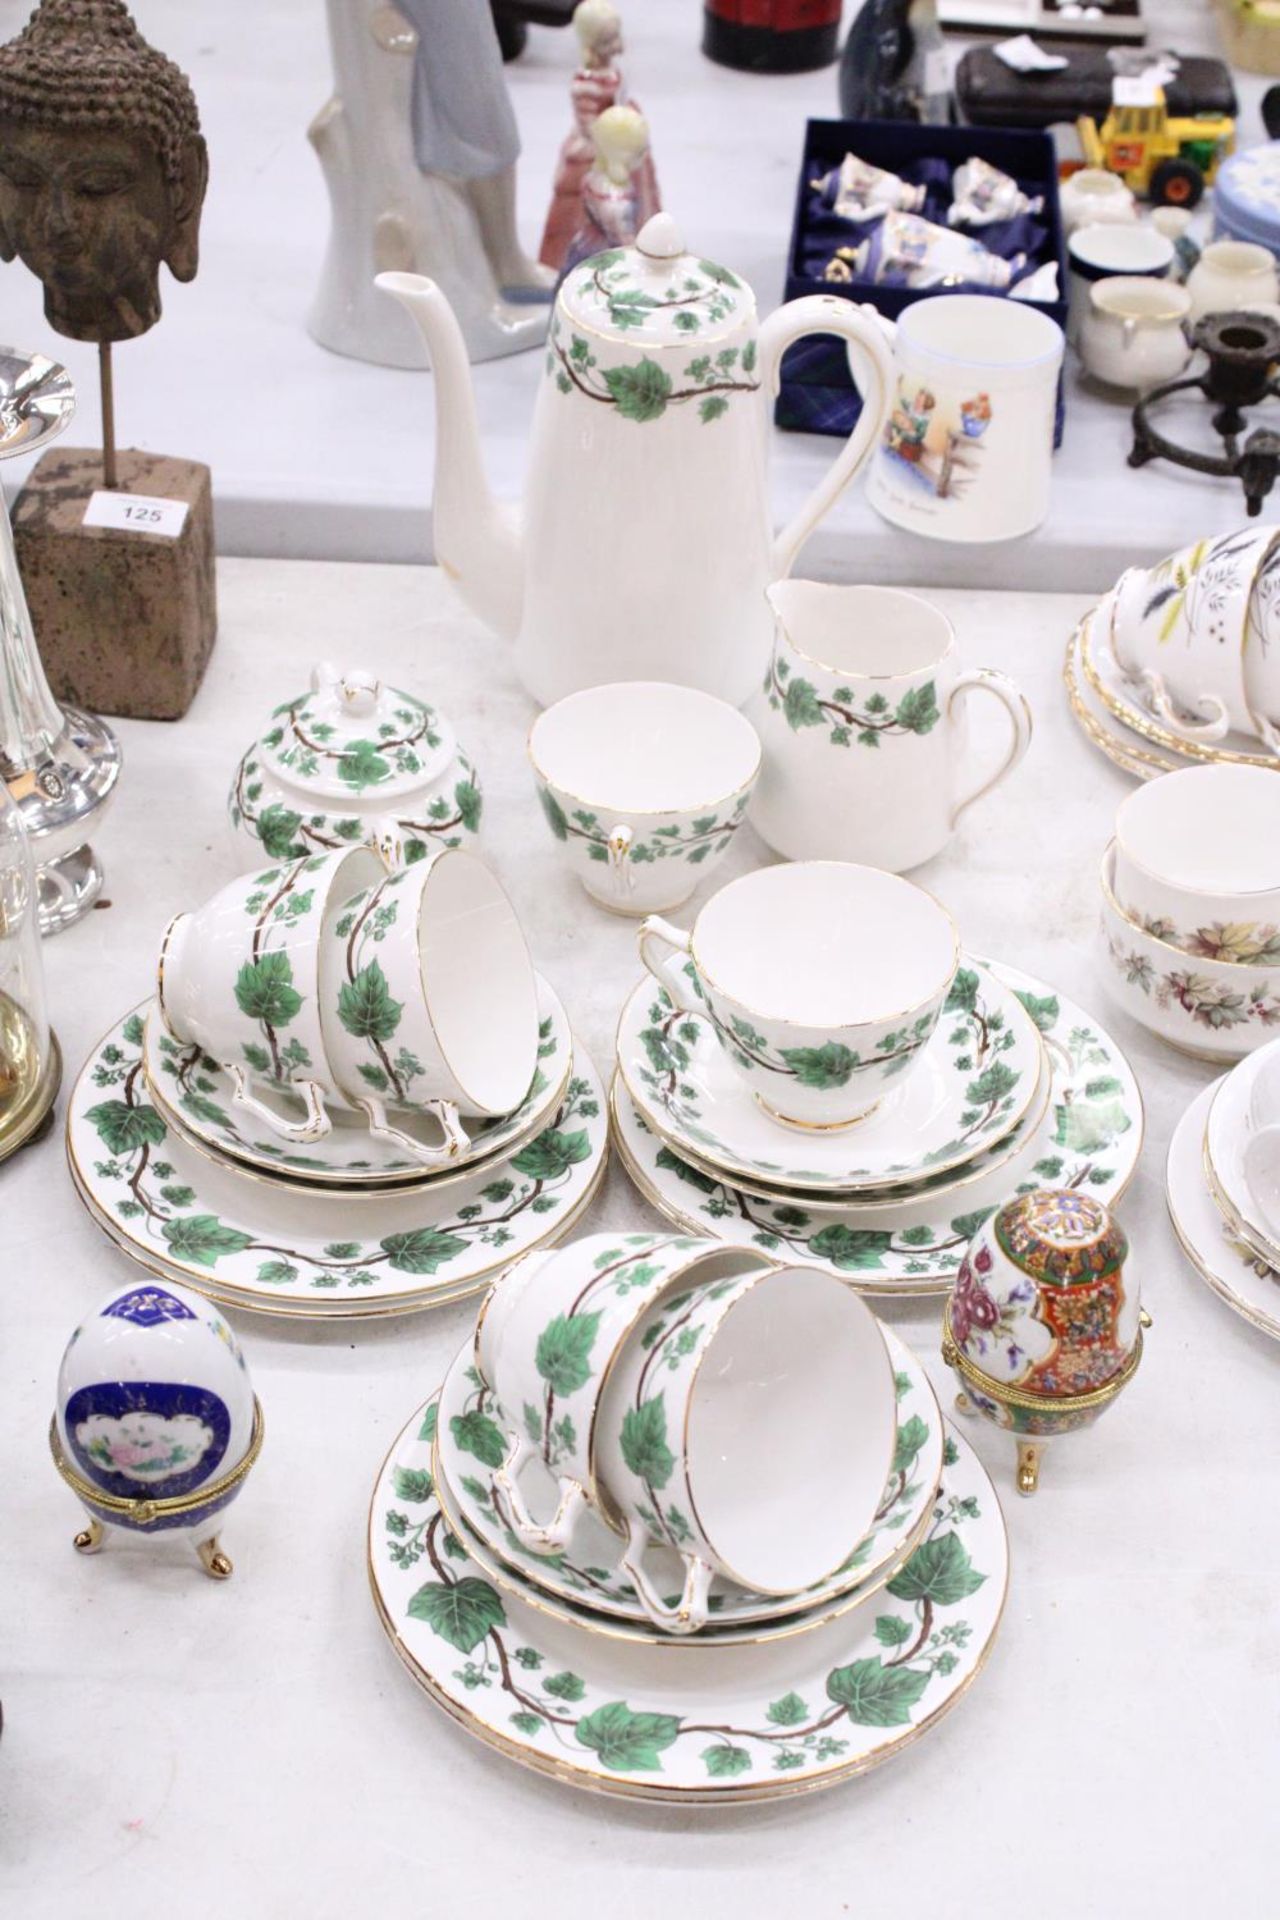 A "CROWN STAFFORDSHIRE" - GREEN IVY TEASET SET TO INCLUDE CUPS, SAUCERS, JUG AND SUGAR BOWL WITH A